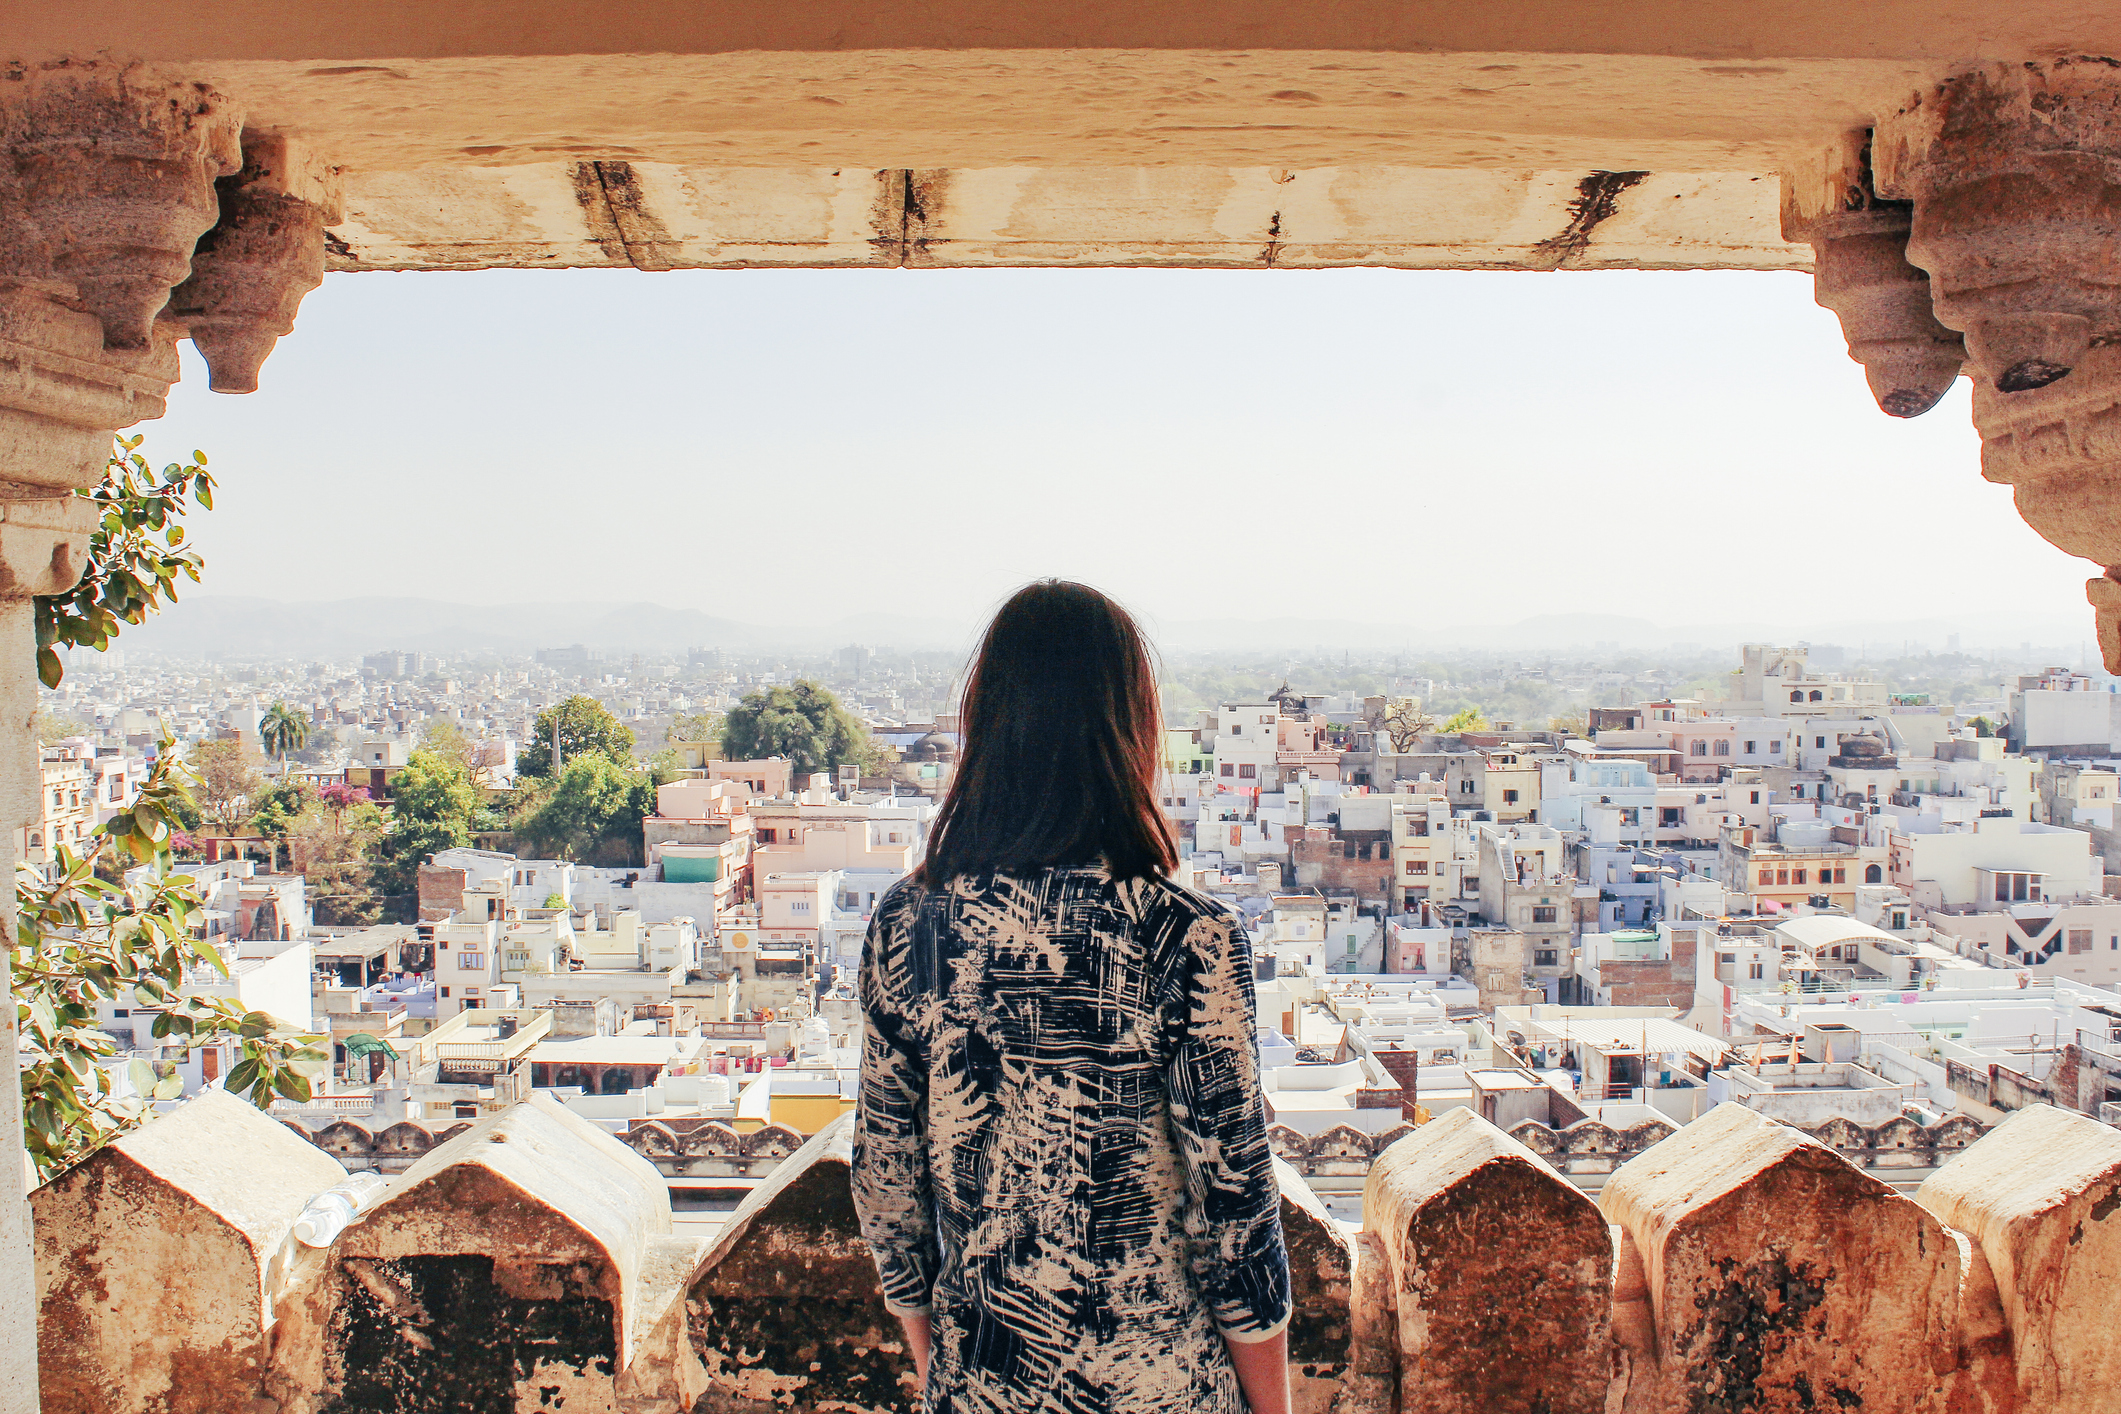 A woman looks out at the view of Udaipur, Rajasthan